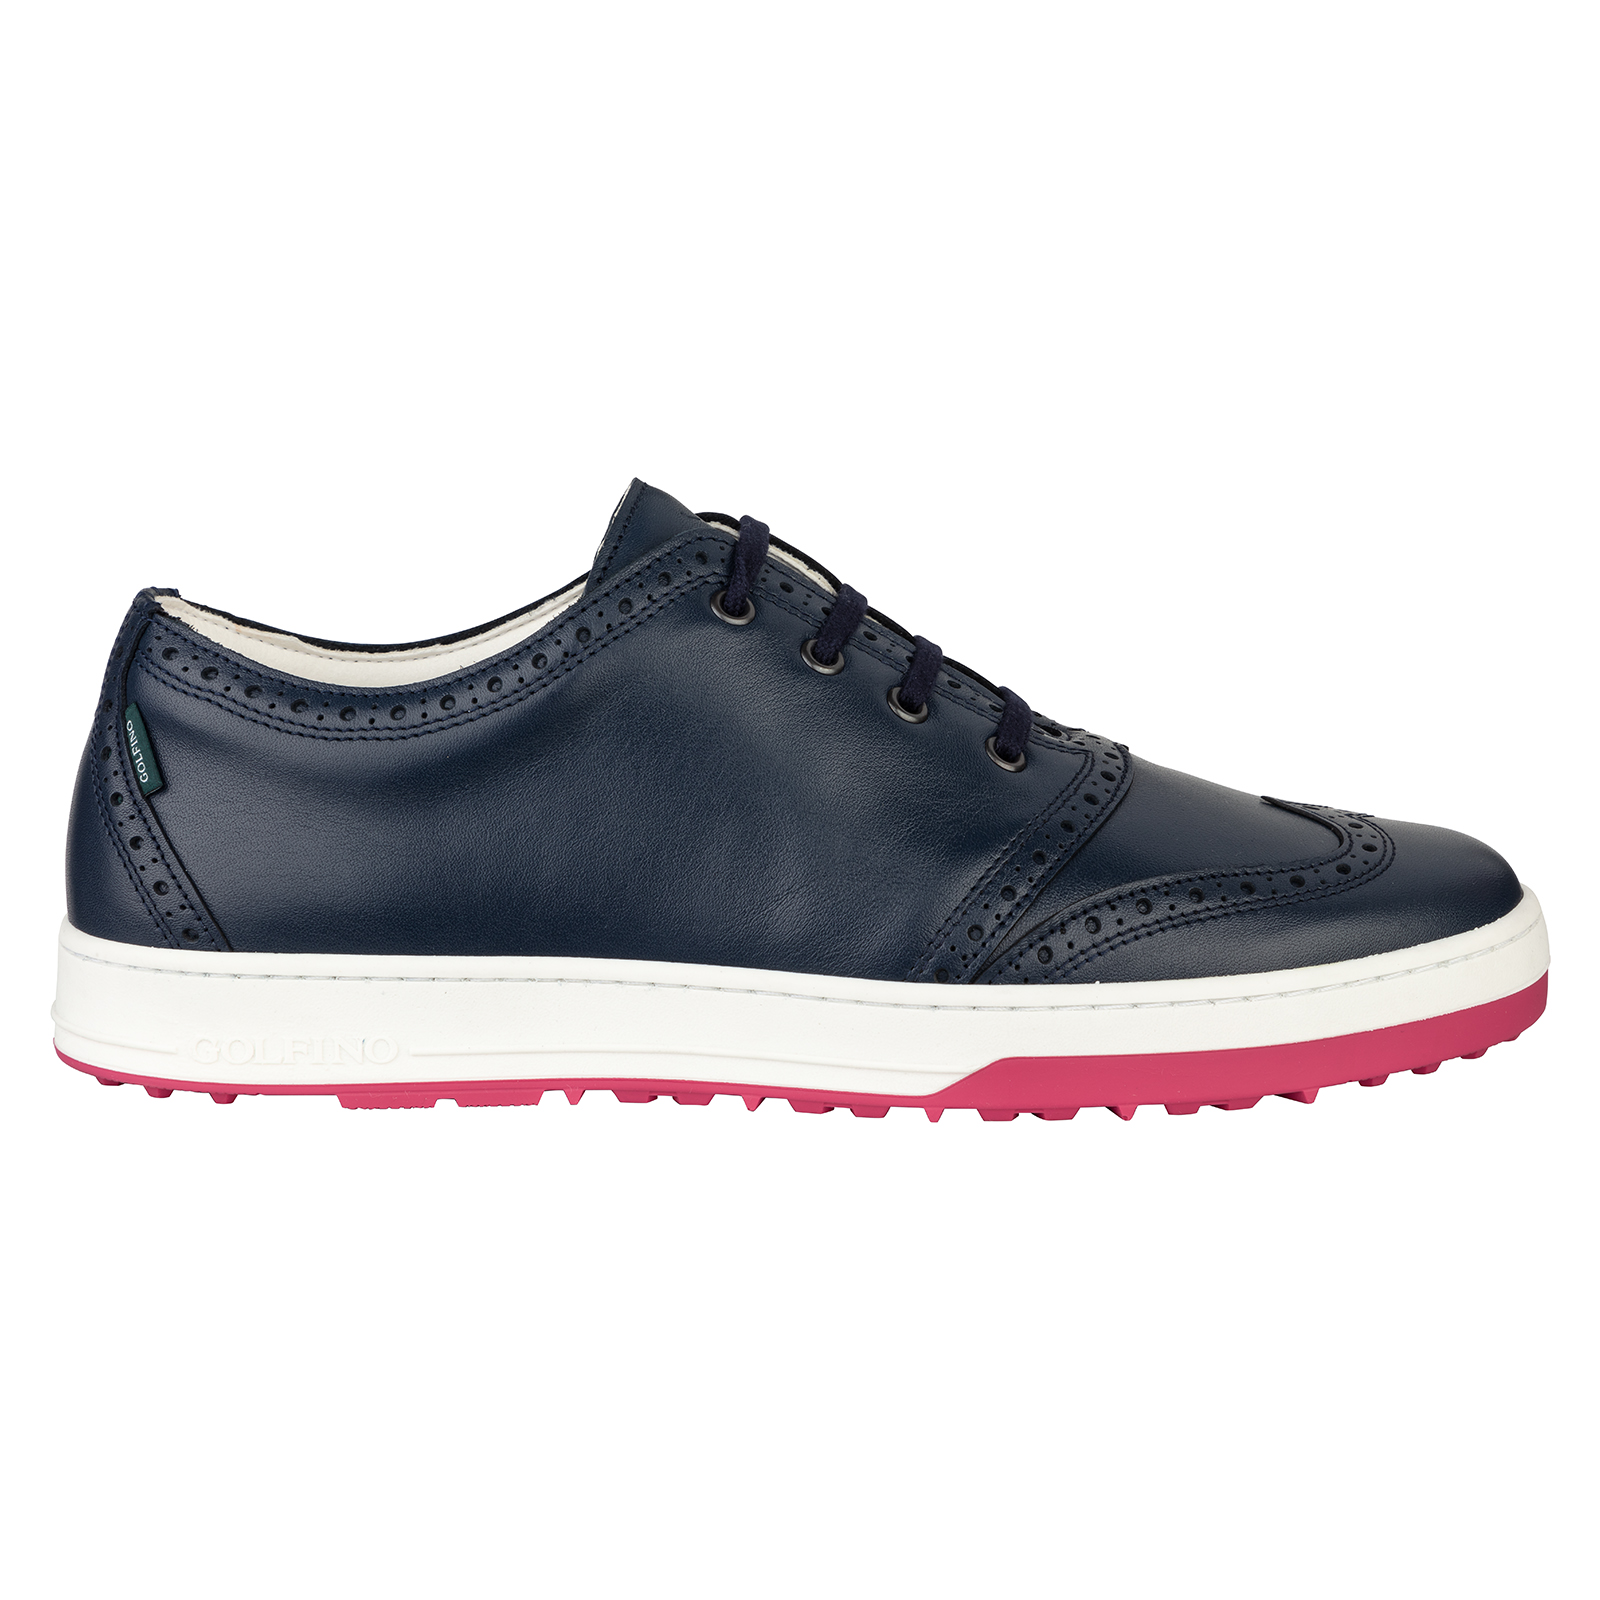 Men's brogue-style golf shoes in genuine leather 